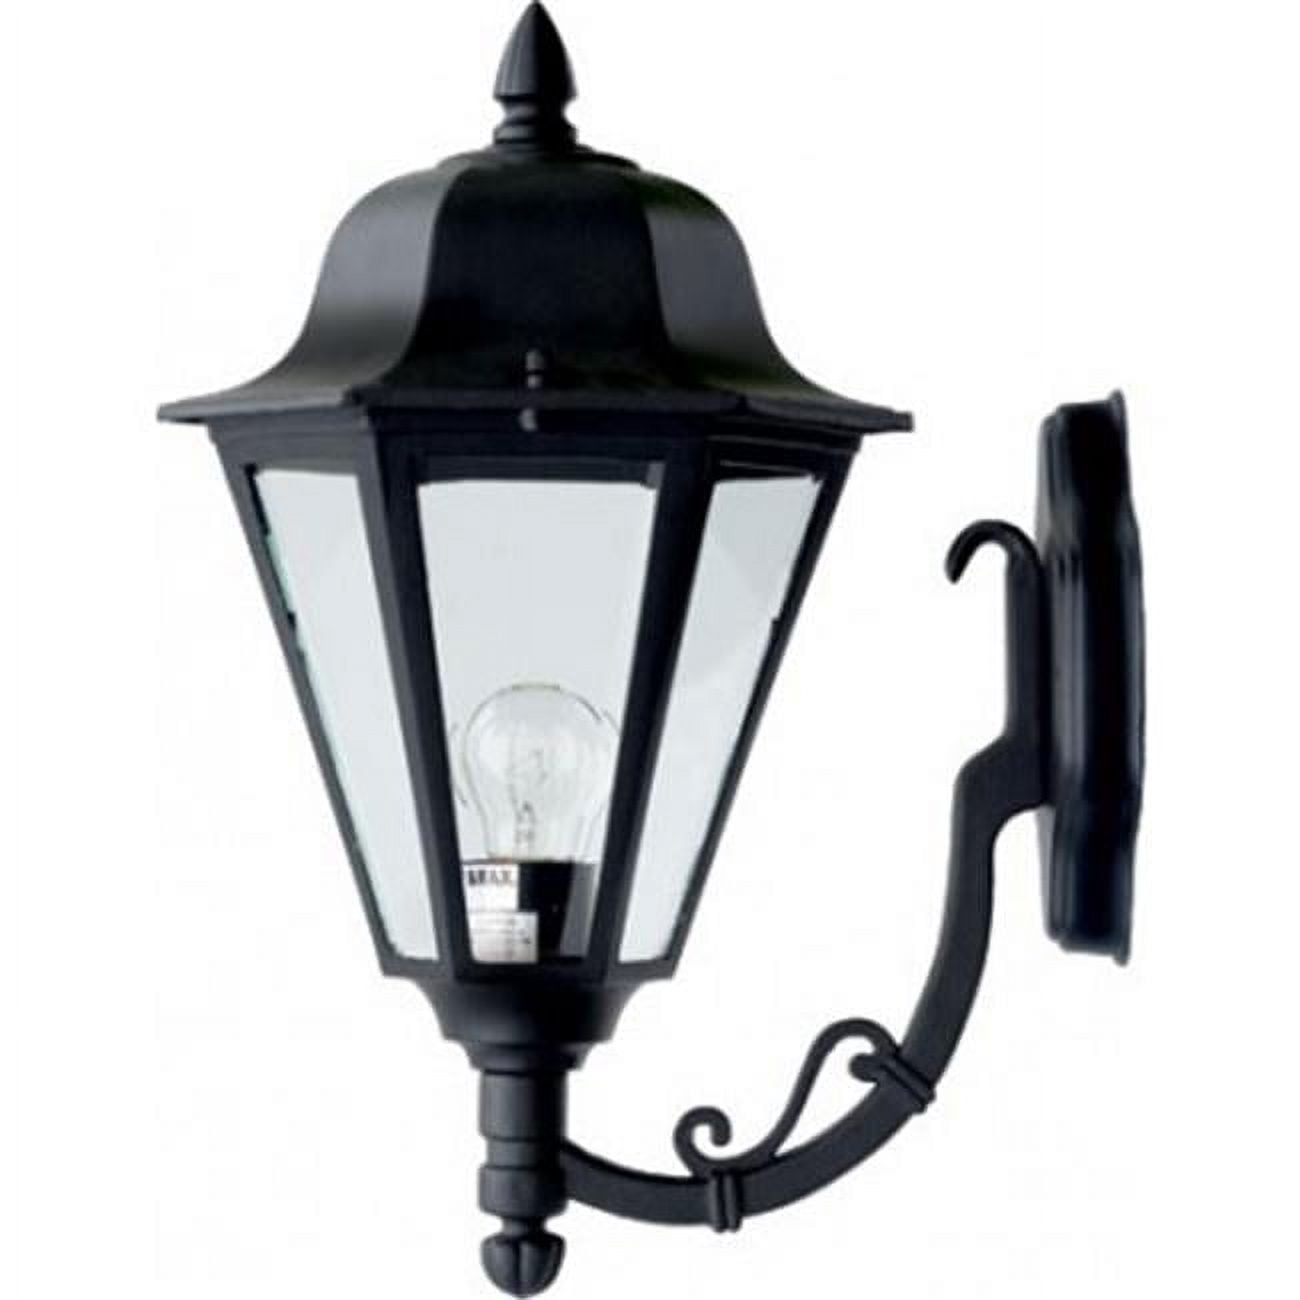 Picture of Dabmar Lighting GM135-B-FROST 120V Incandescent Daniella Wall Light Fixture with Frosted Glass - Black